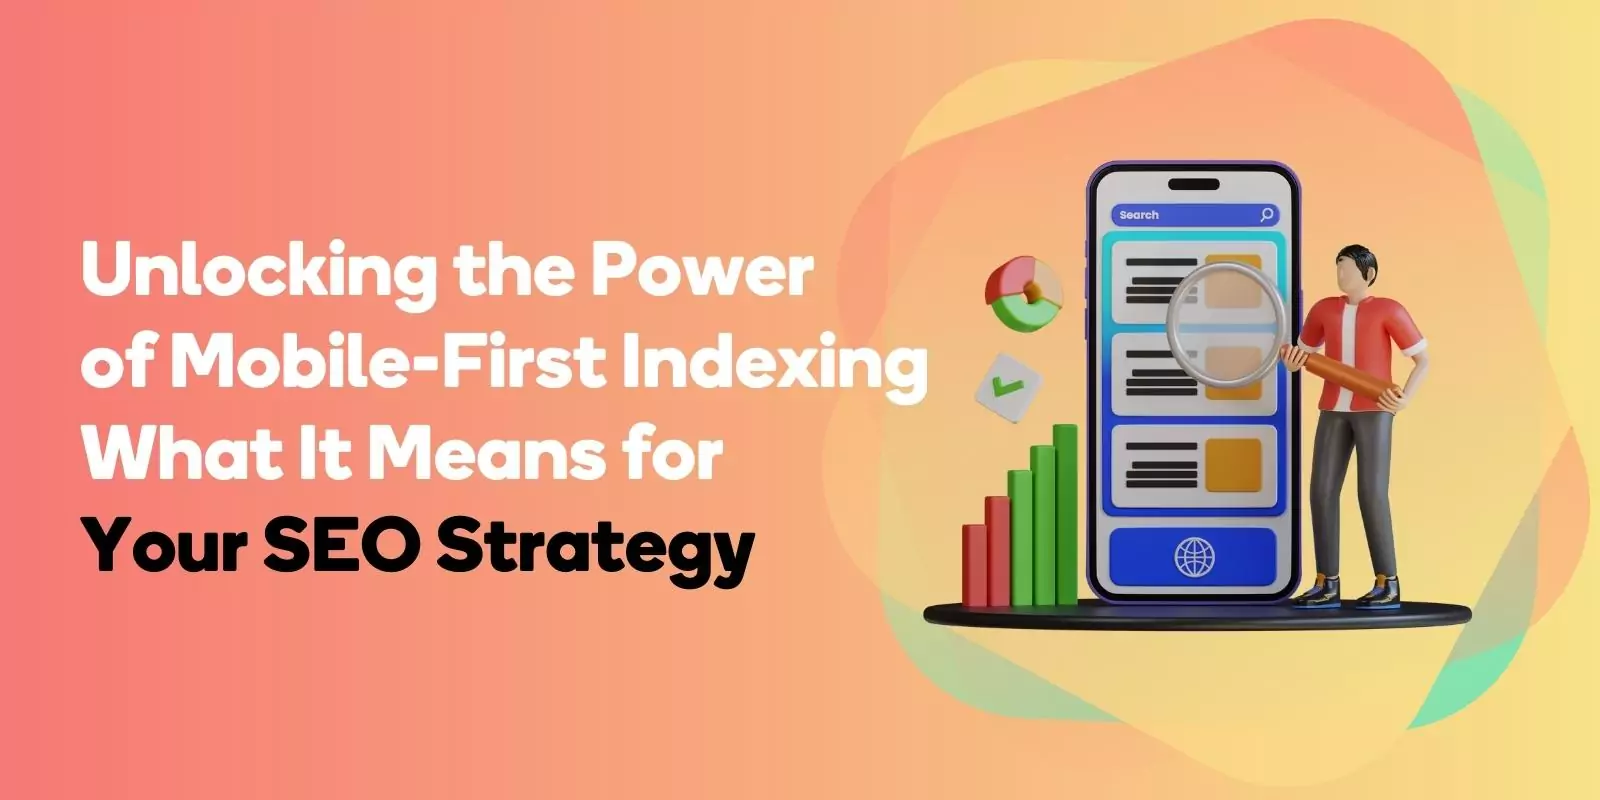 mobile-first-indexing-seo-strategy-guide